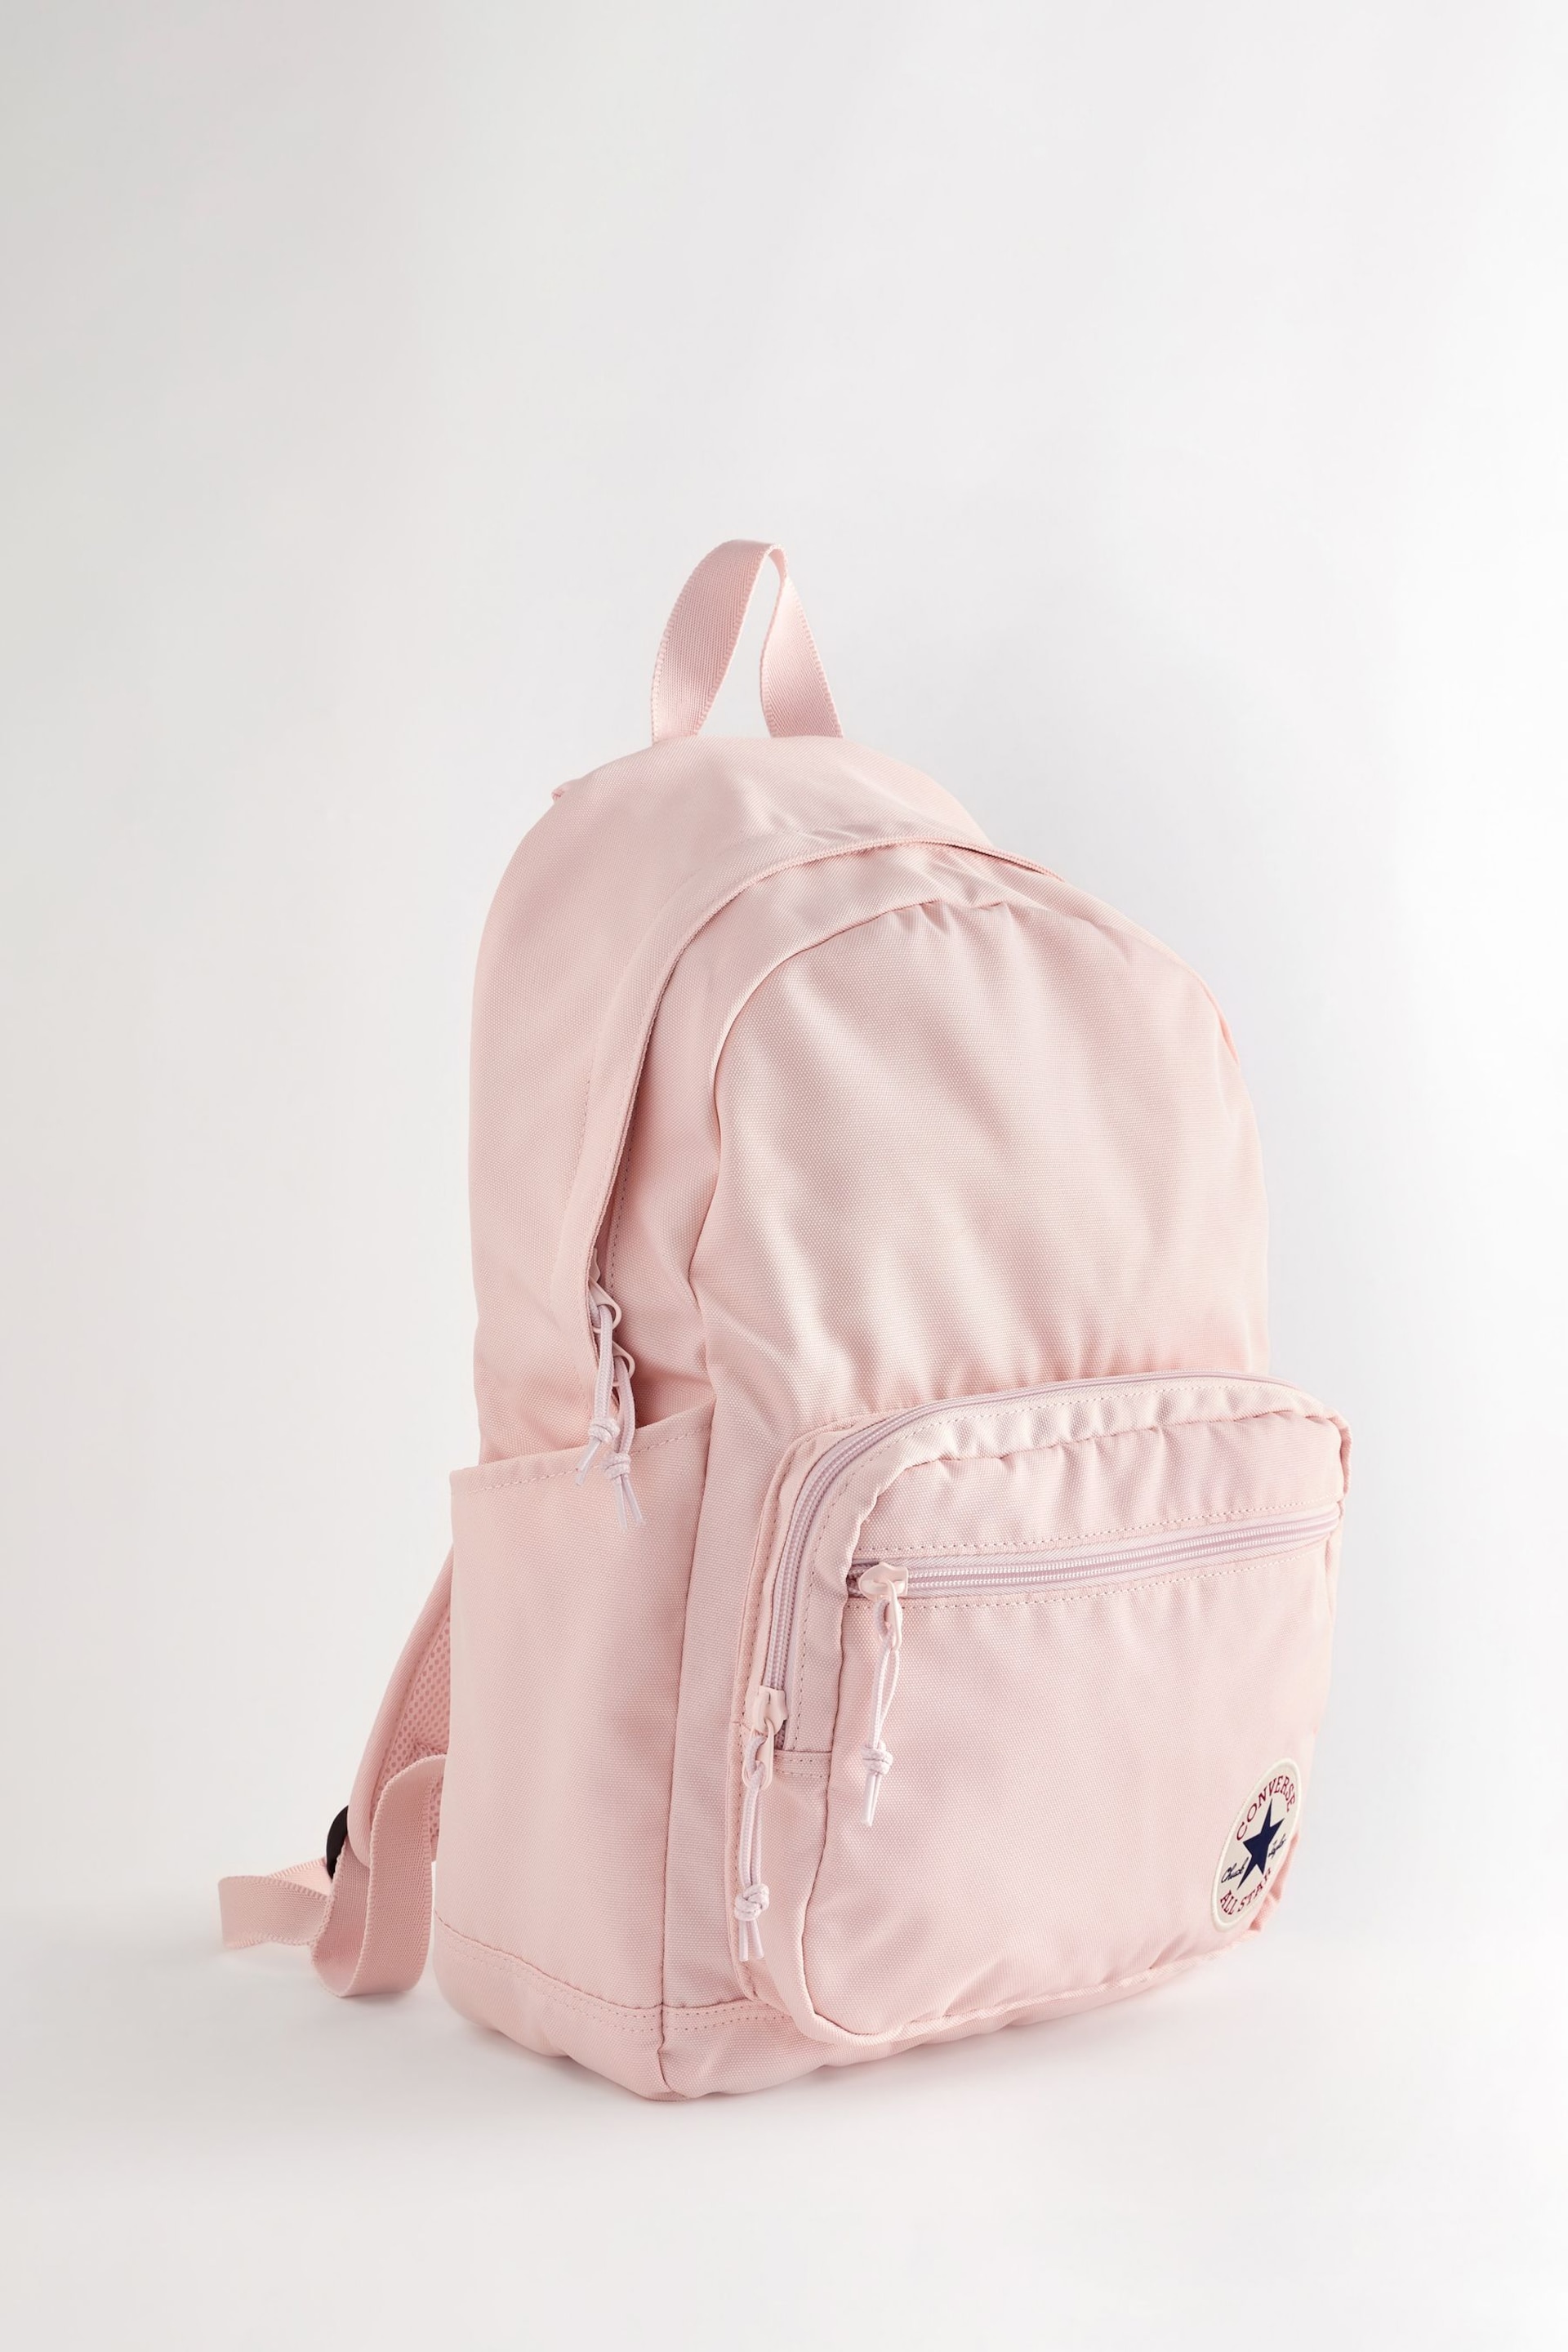 Converse Pink Converse Black Go 2 Backpack - Image 1 of 6